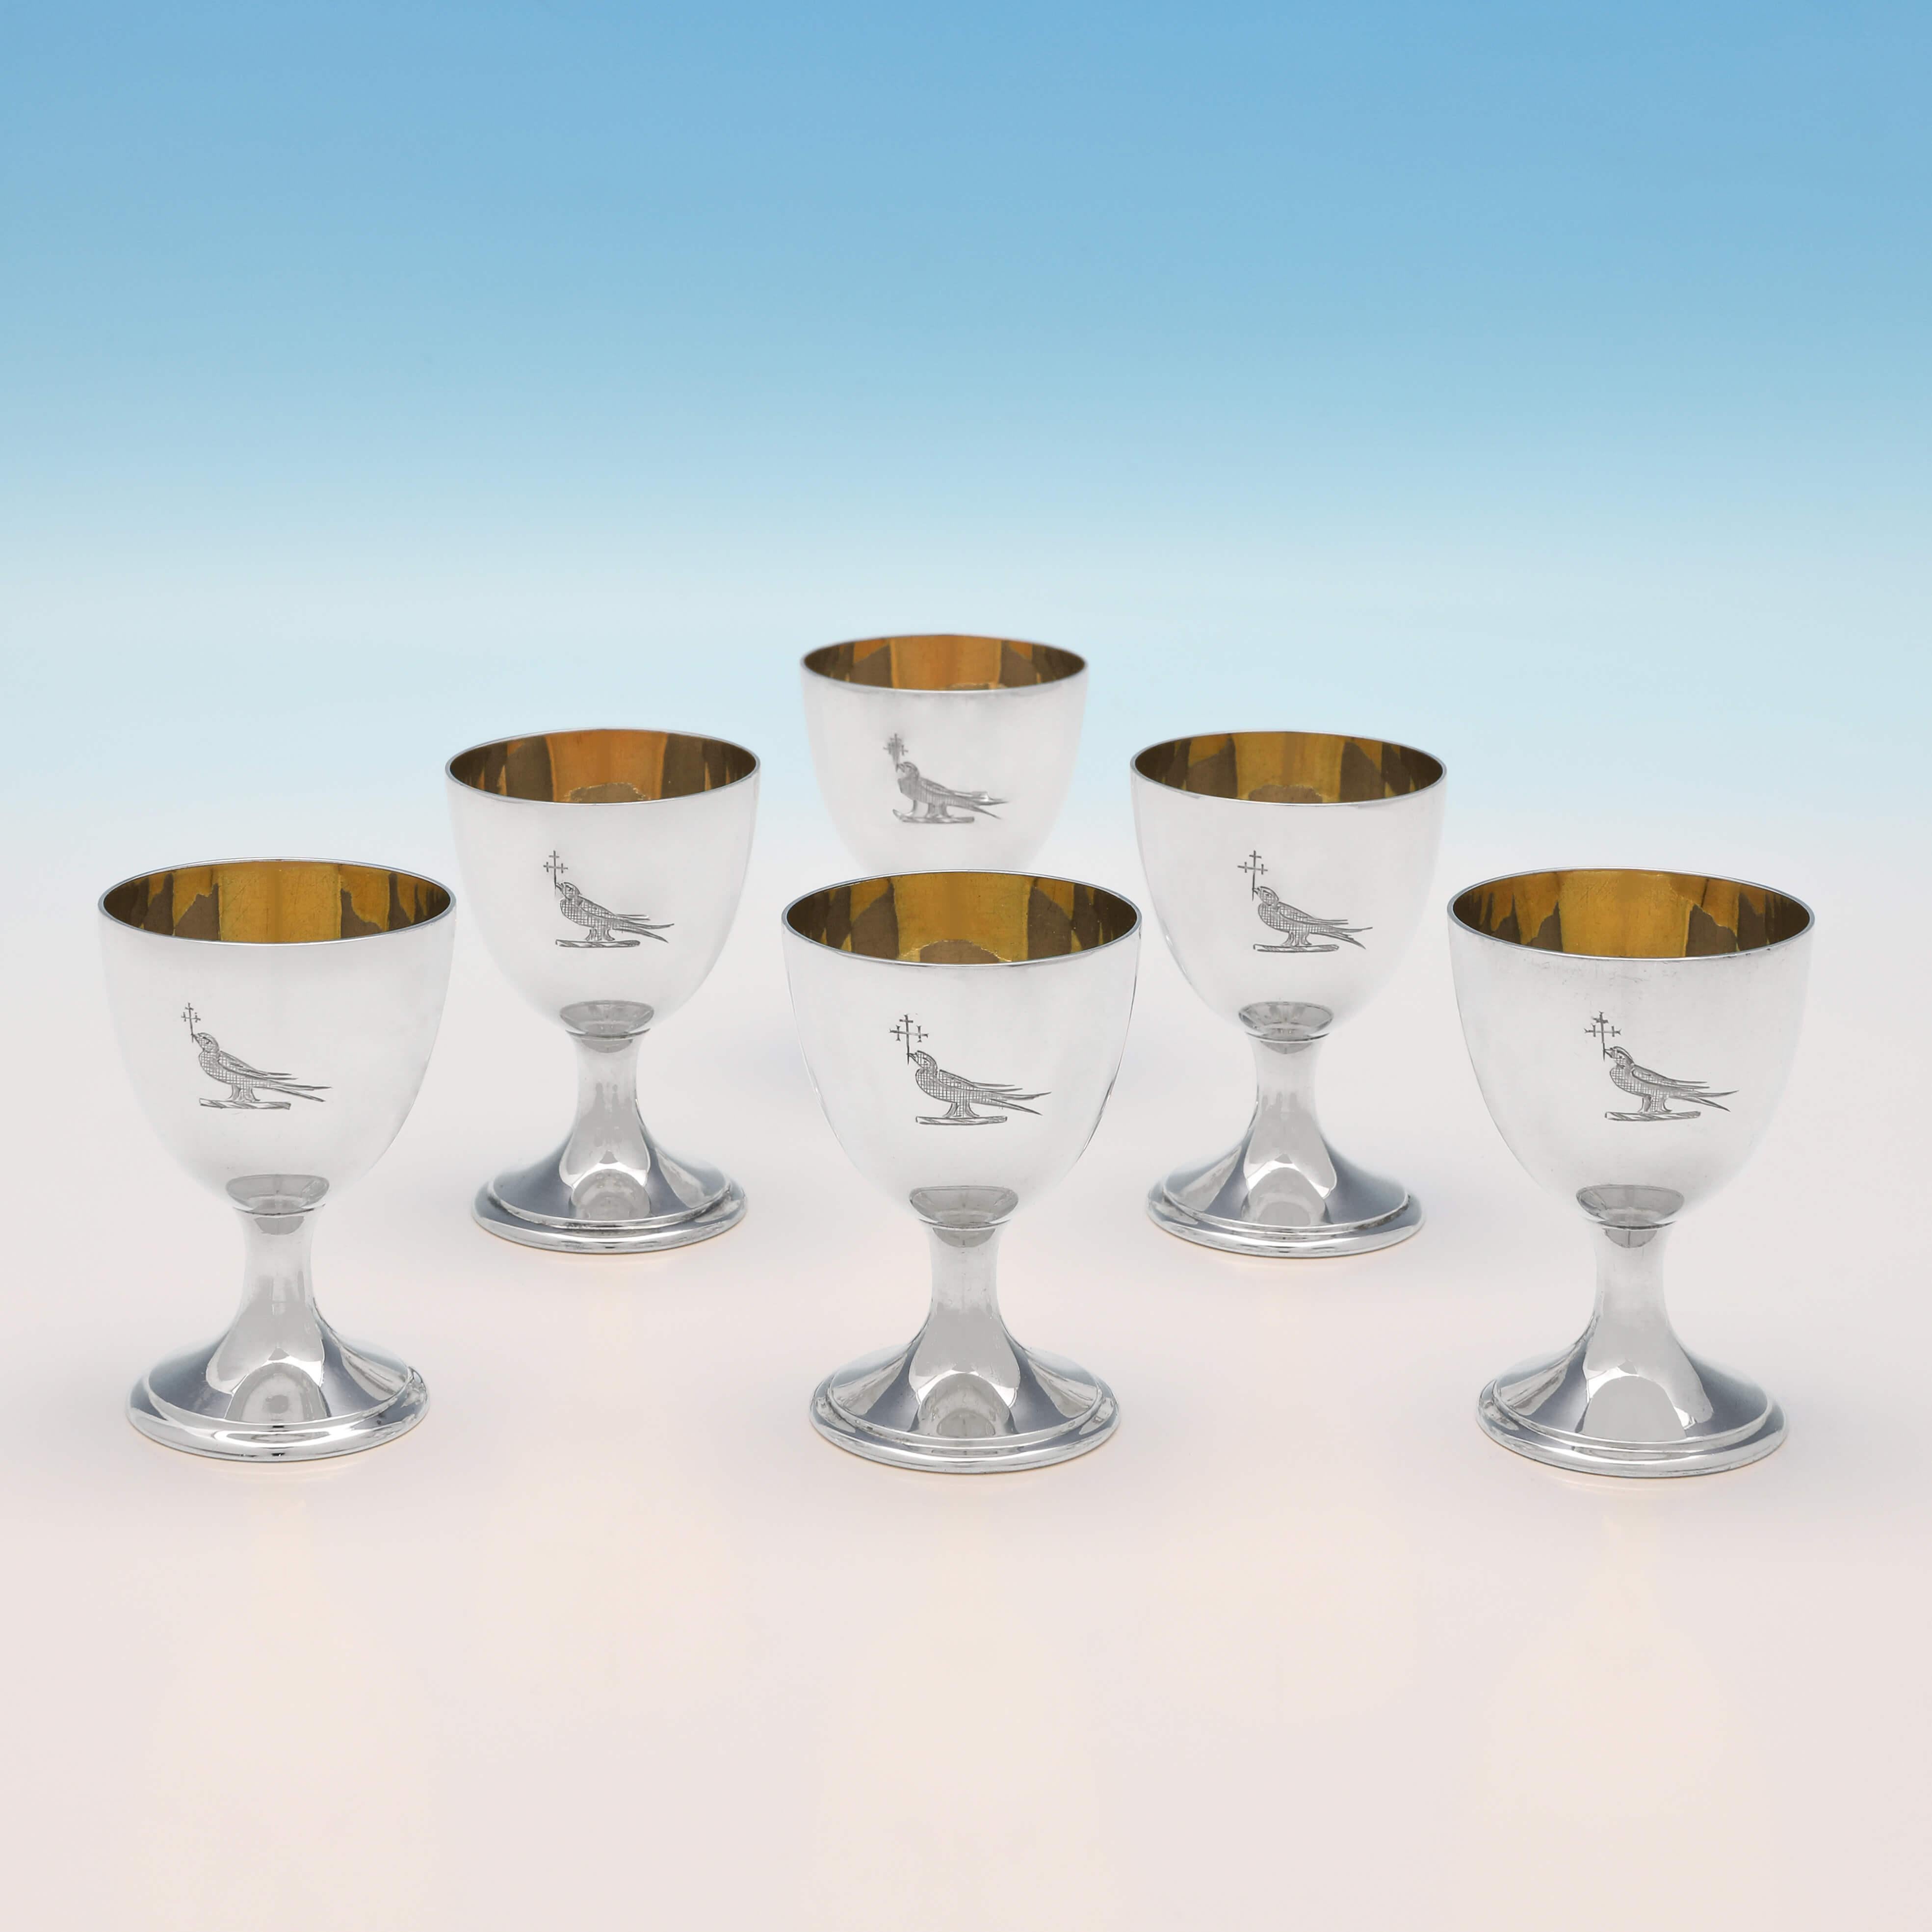 Hallmarked in London in 1884 by Barnards, this handsome, set of six, Victorian, antique sterling silver egg cups, are plain in style, featuring gilt interiors and an engraved crest. Each egg cup measures 2.5